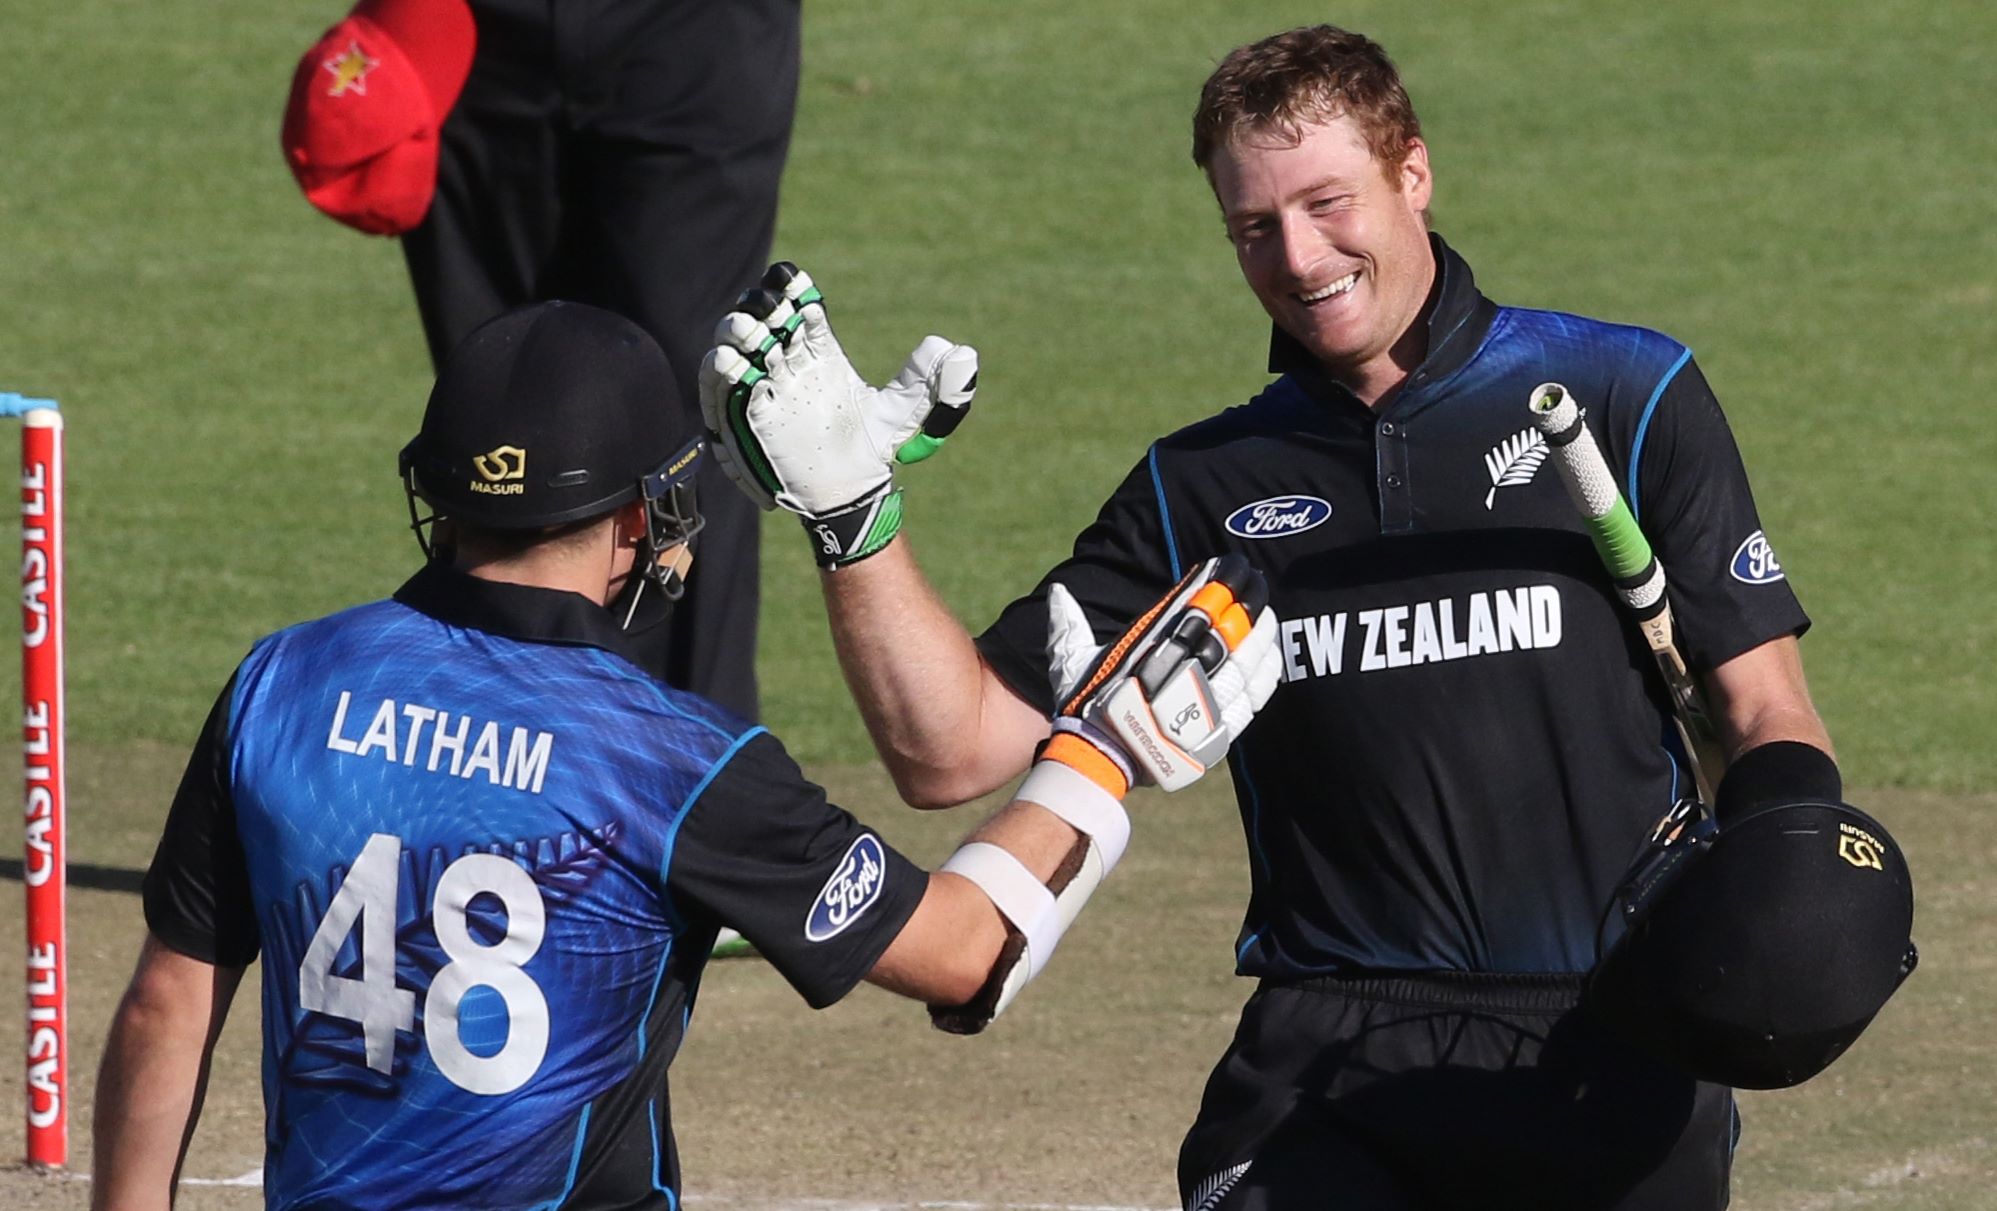 New Zealand's Martin Guptill (right) celebrates with his teammate Tom Latham after scoring a century against Zimbabwe during their second ODI match in Harare on Tuesday. Photo: AFP